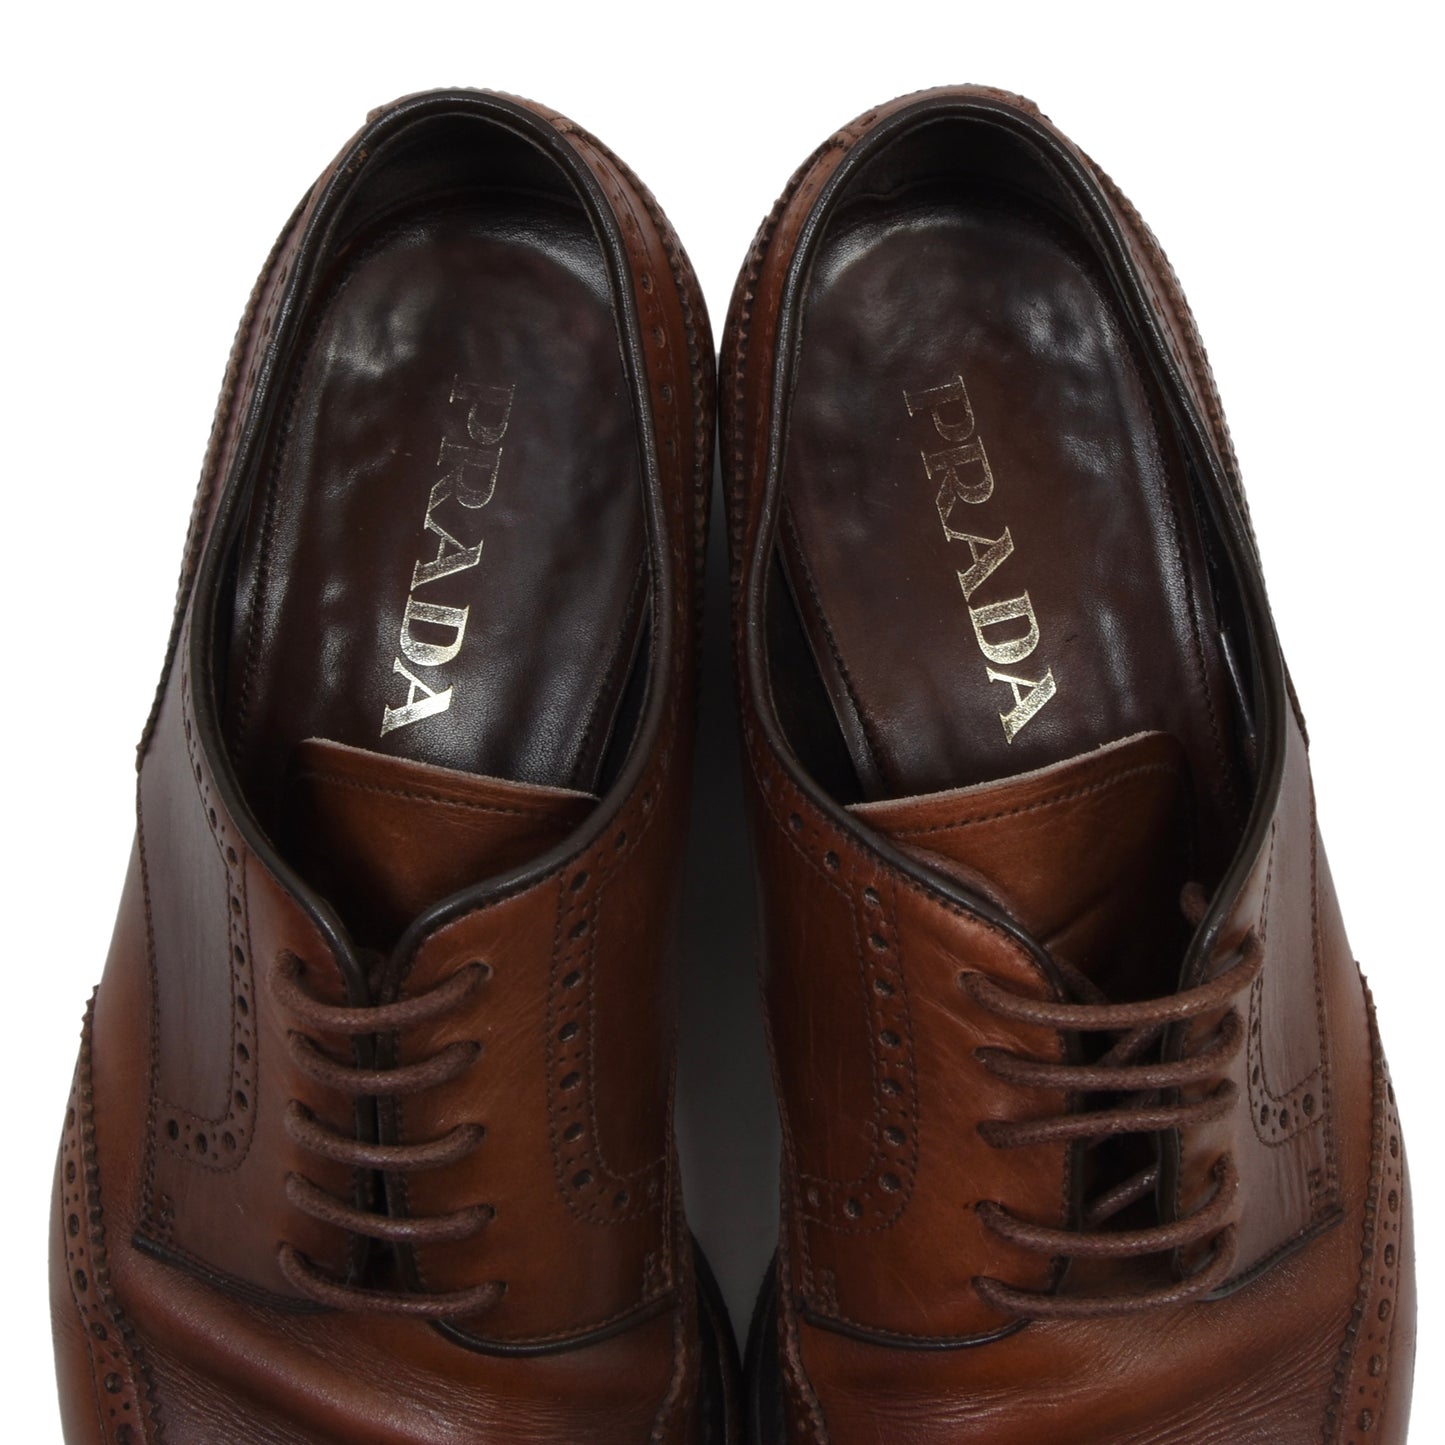 Prada Leather Shoes Size 8 - Brown